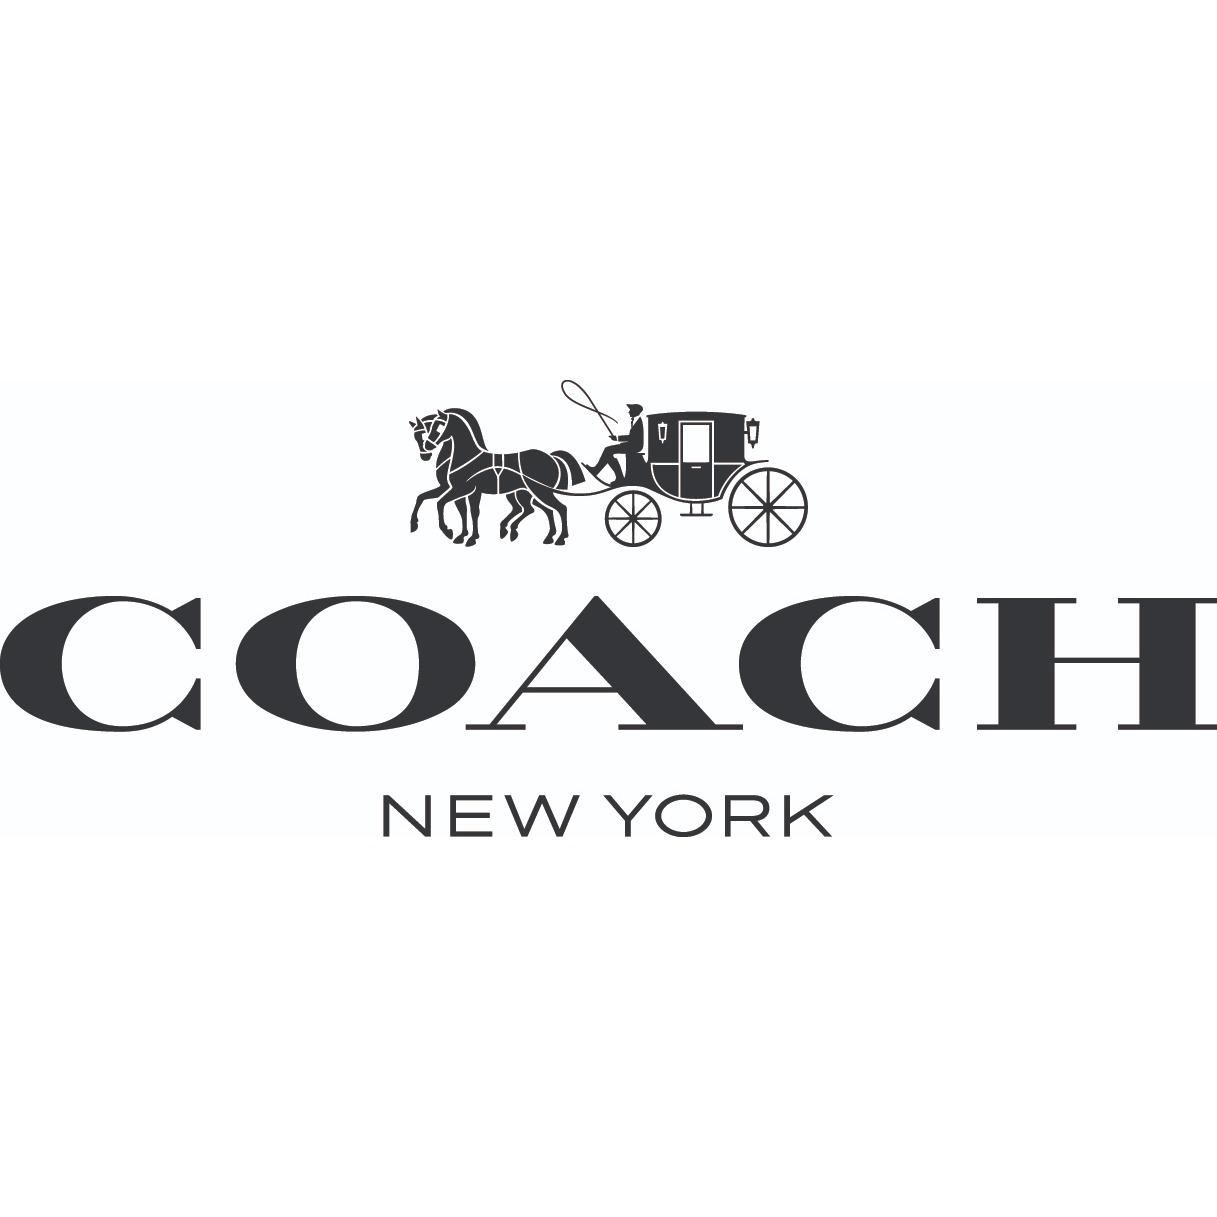 COACH - Clothing Manufacturers & Wholesalers